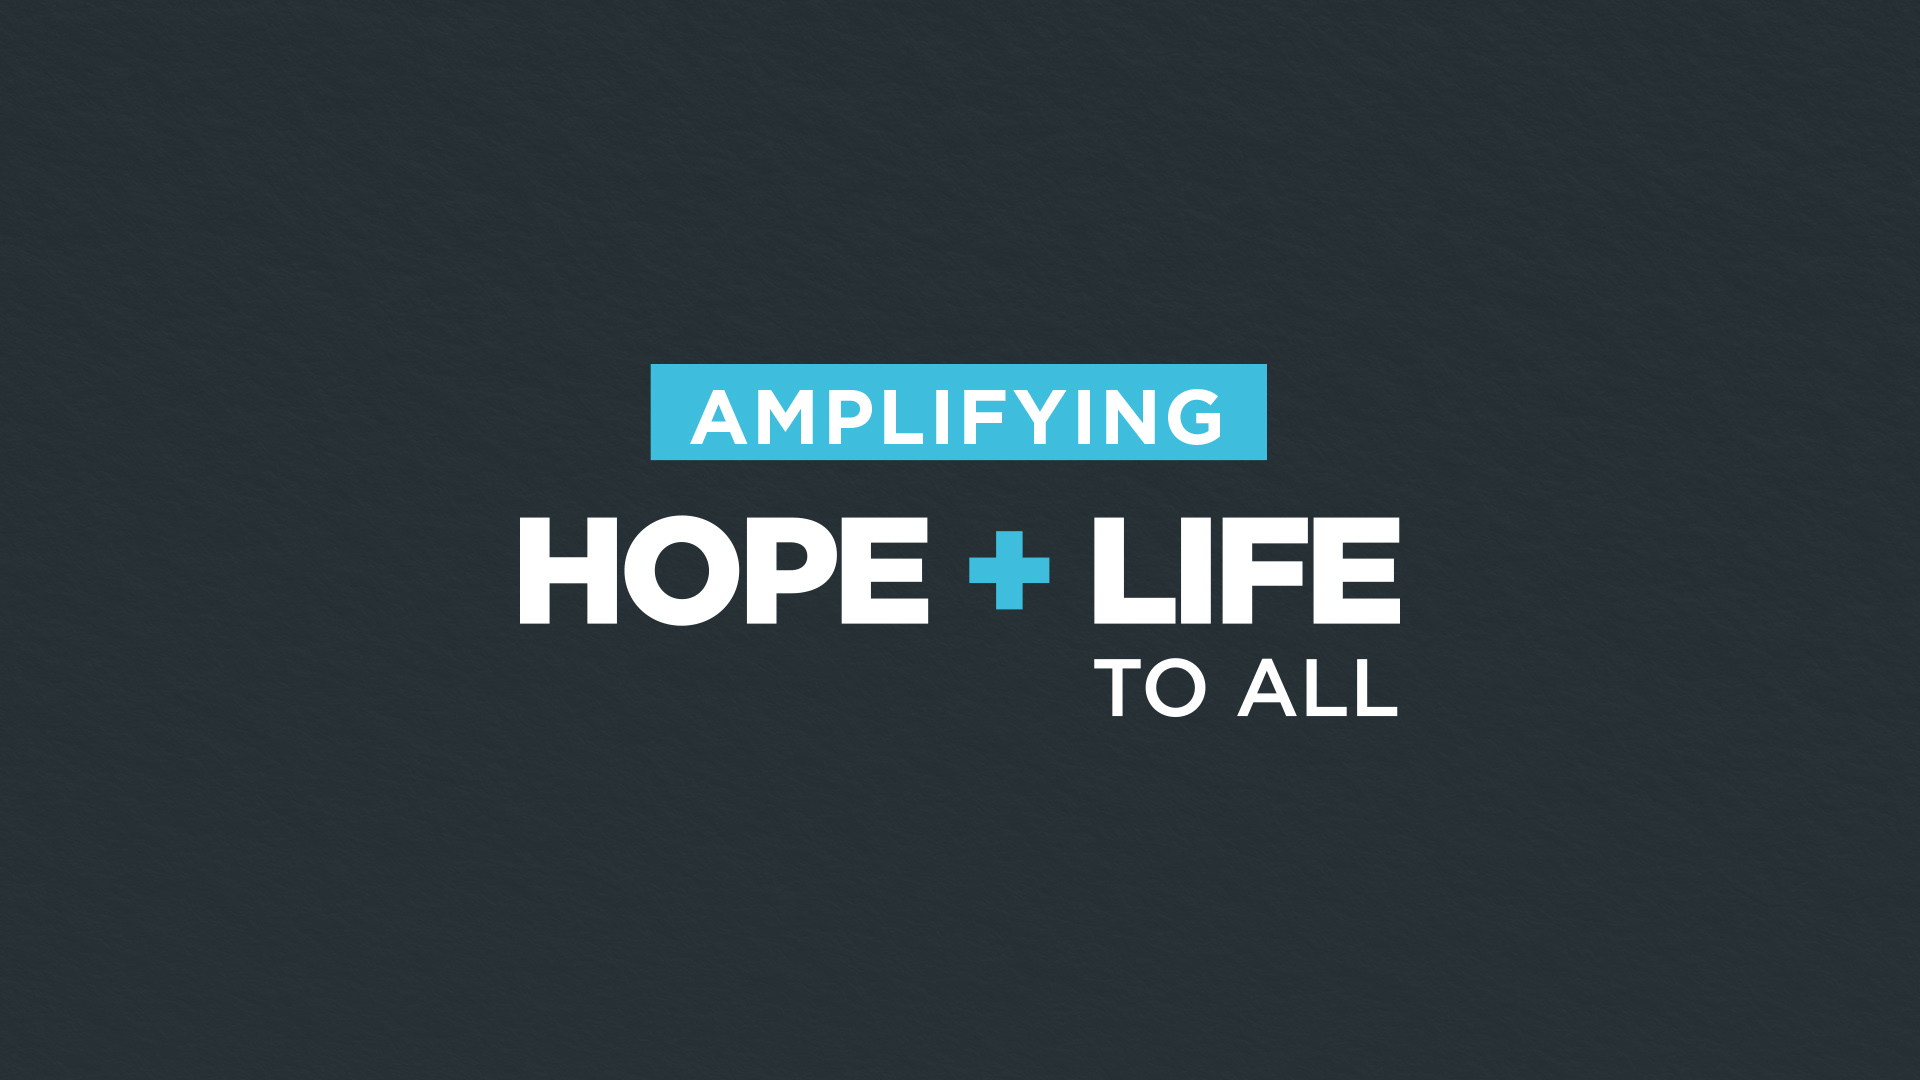   Amplifying  Hope + Life To All